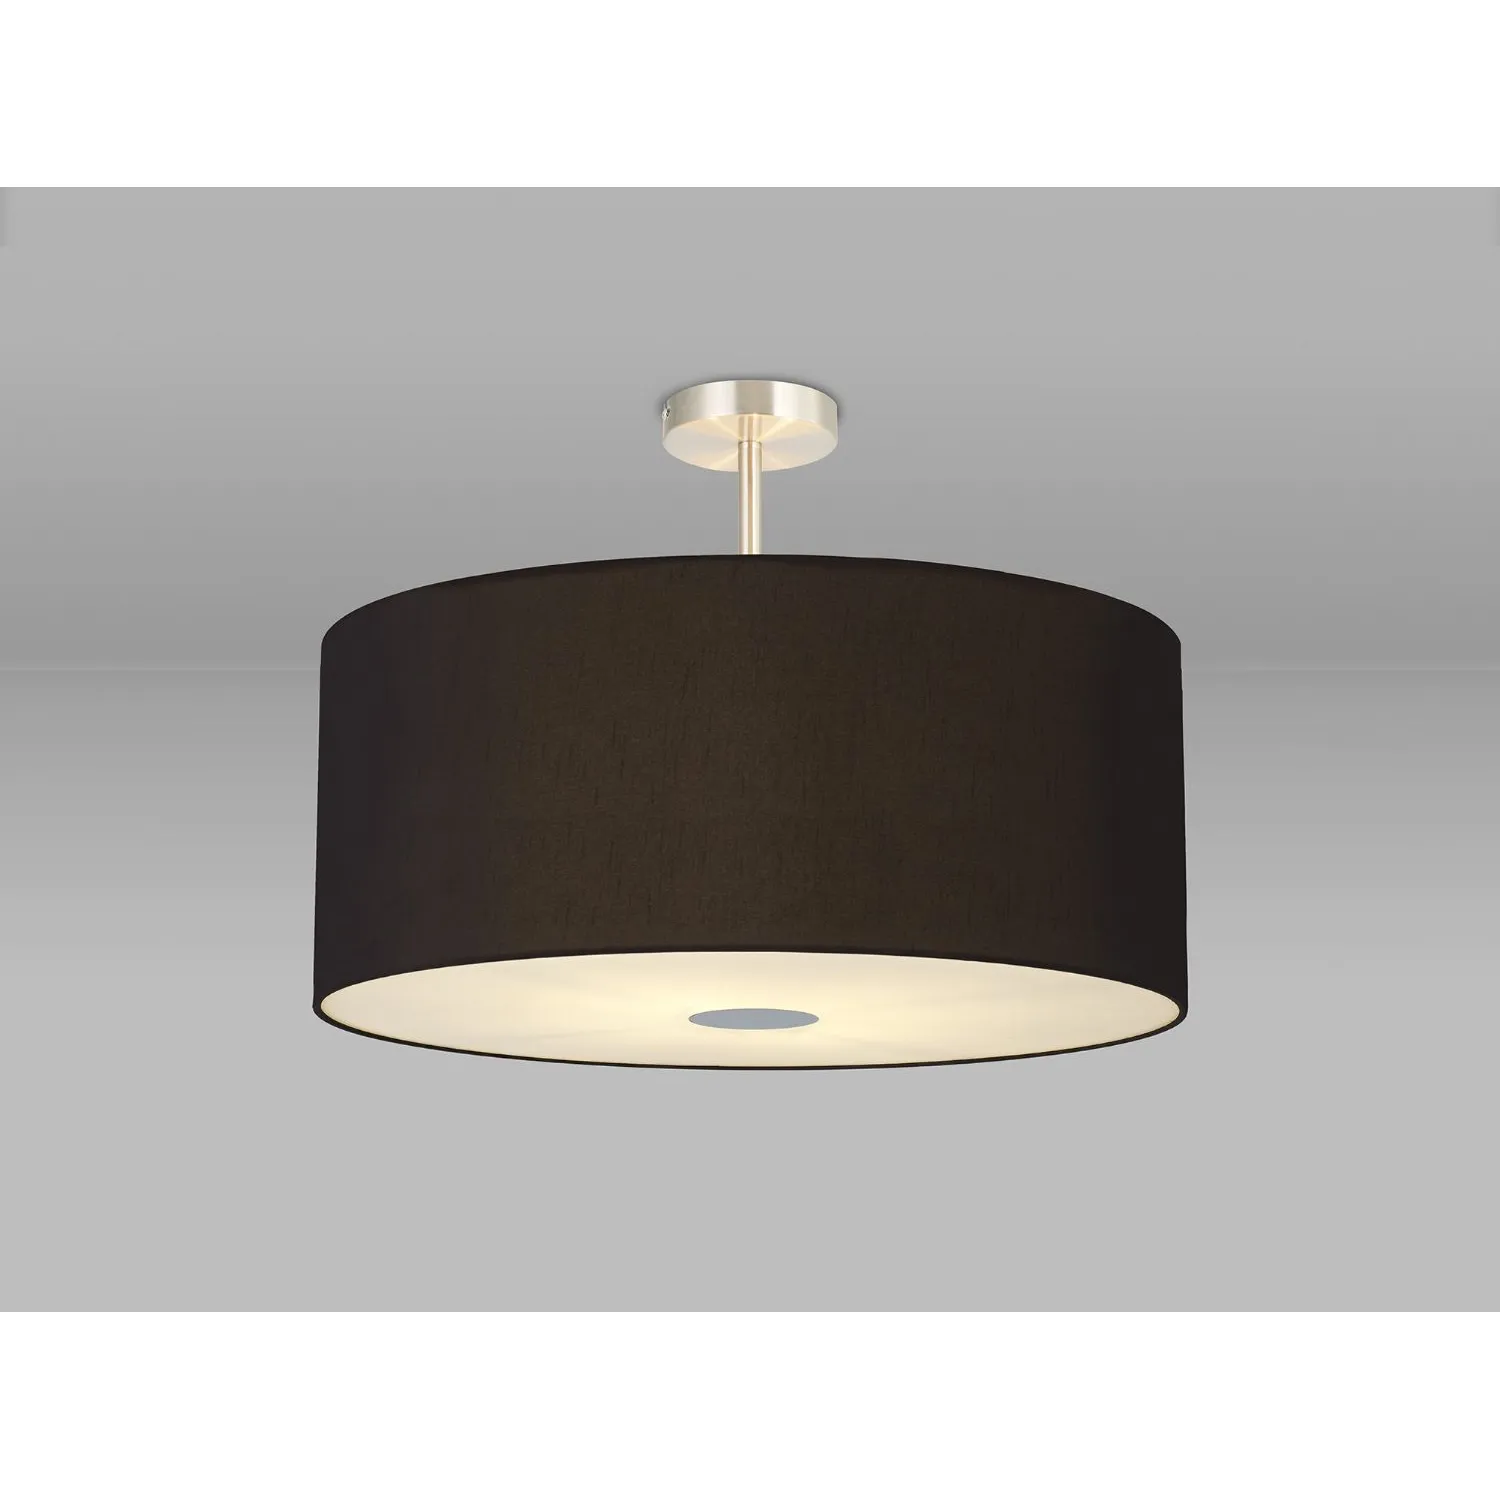 Baymont Satin Nickel 5 Light E27 Semi Flush Fixture c w 600 Dual Faux Silk Fabric Shade, Black Green Olive And 600mm Frosted PC Acrylic Diffuser